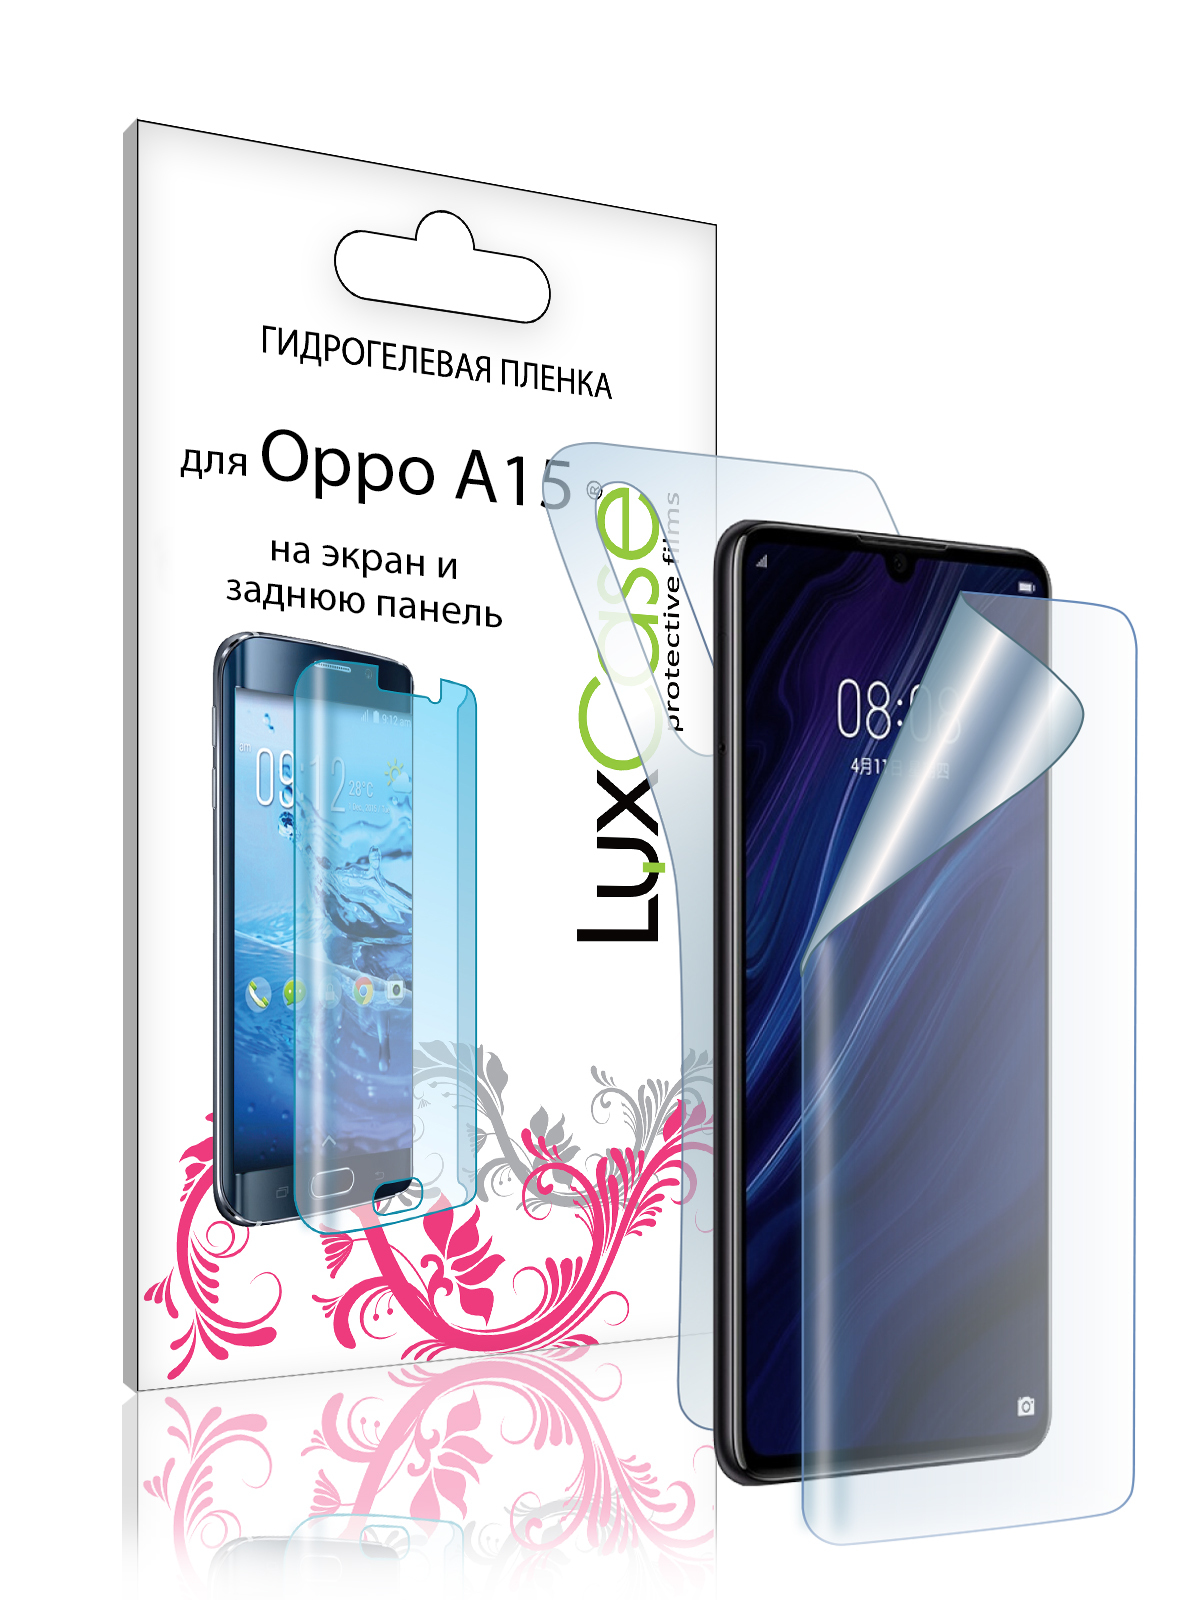 Пленка гидрогелевая LuxCase для Oppo A15 0.14mm Front and Back Transparent 86556 гидрогелевая пленка luxcase для oppo a83 0 14mm front and back transparent